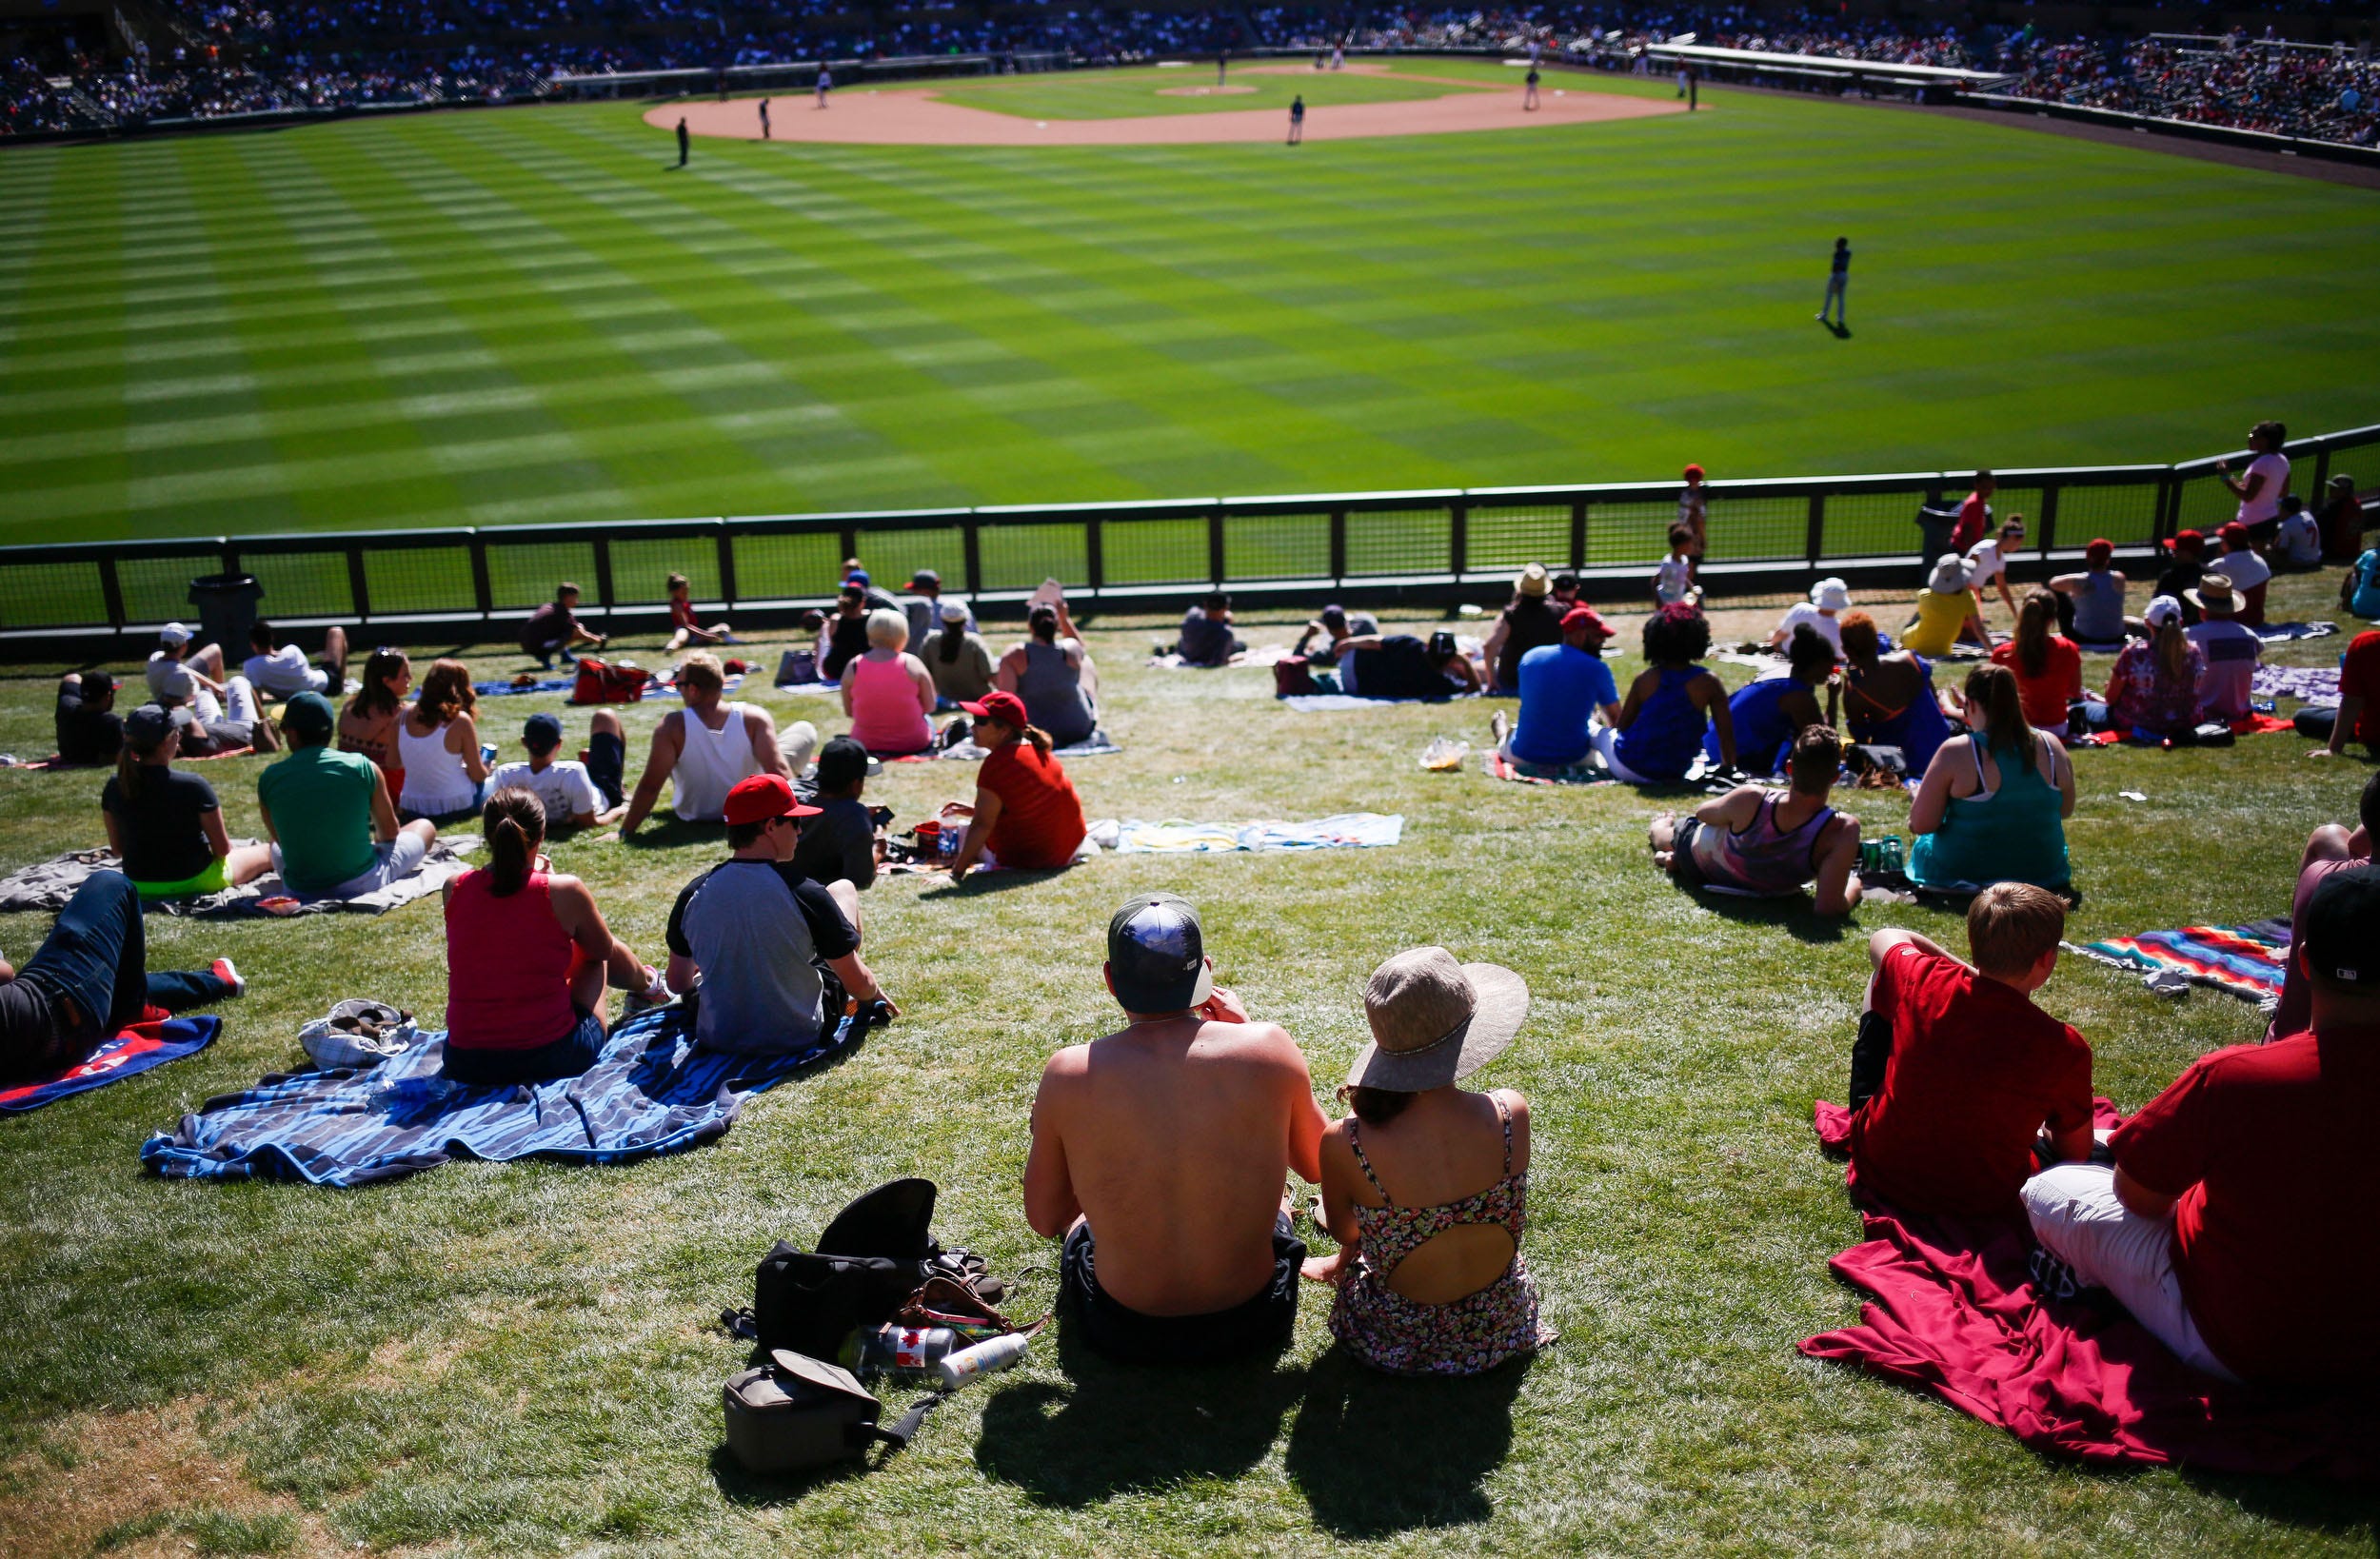 Cactus League spring training attendance and schedules AZ Data ...